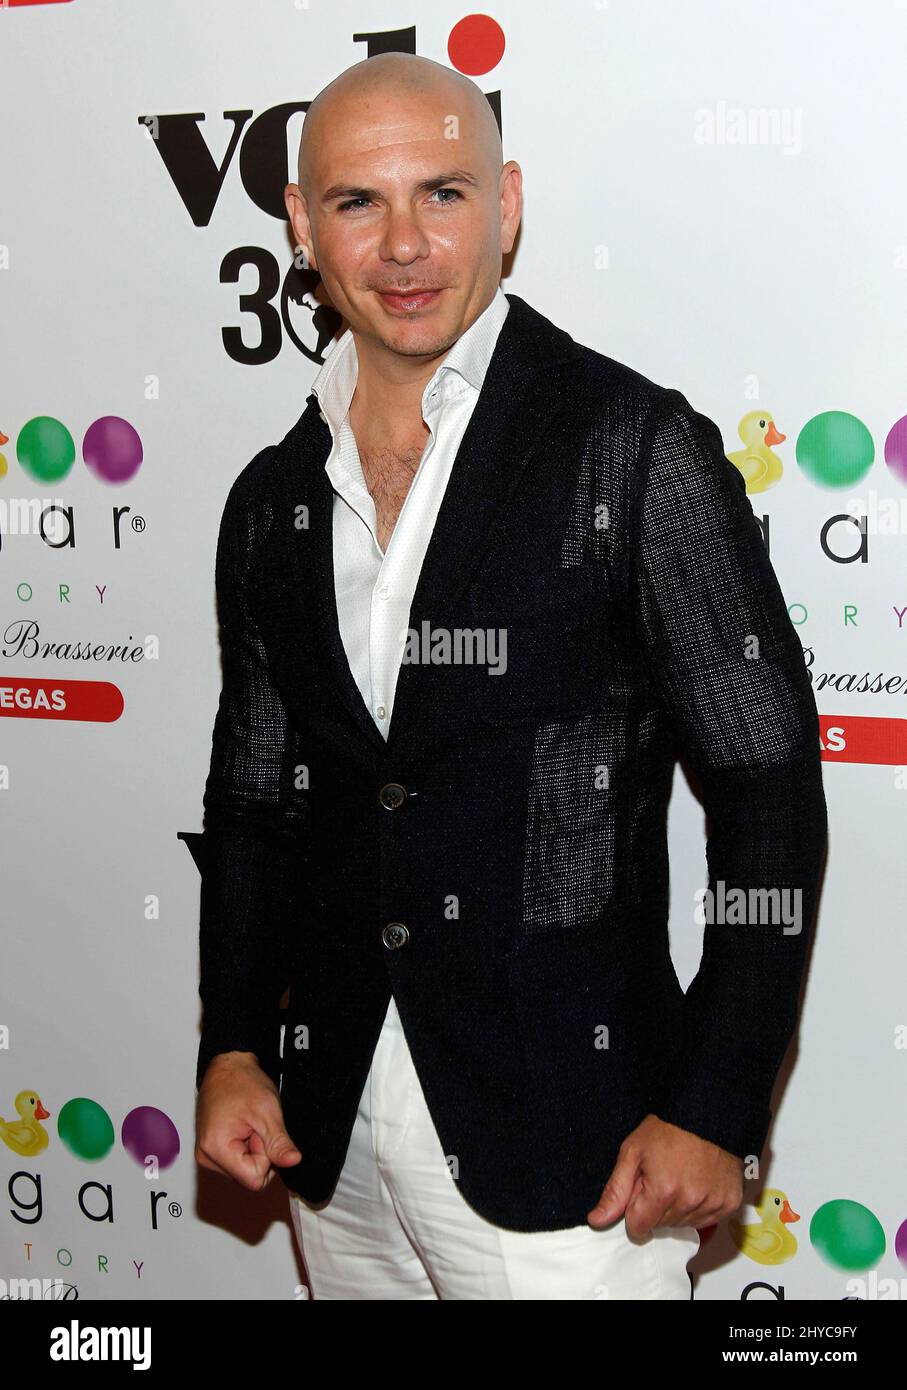 Pitbull attending the Sugar Factory Grand Opening Celebration Month with an appearance by Pitbull, at the Sugar Factory American Brasserie in Las Vegas, Nevada Stock Photo